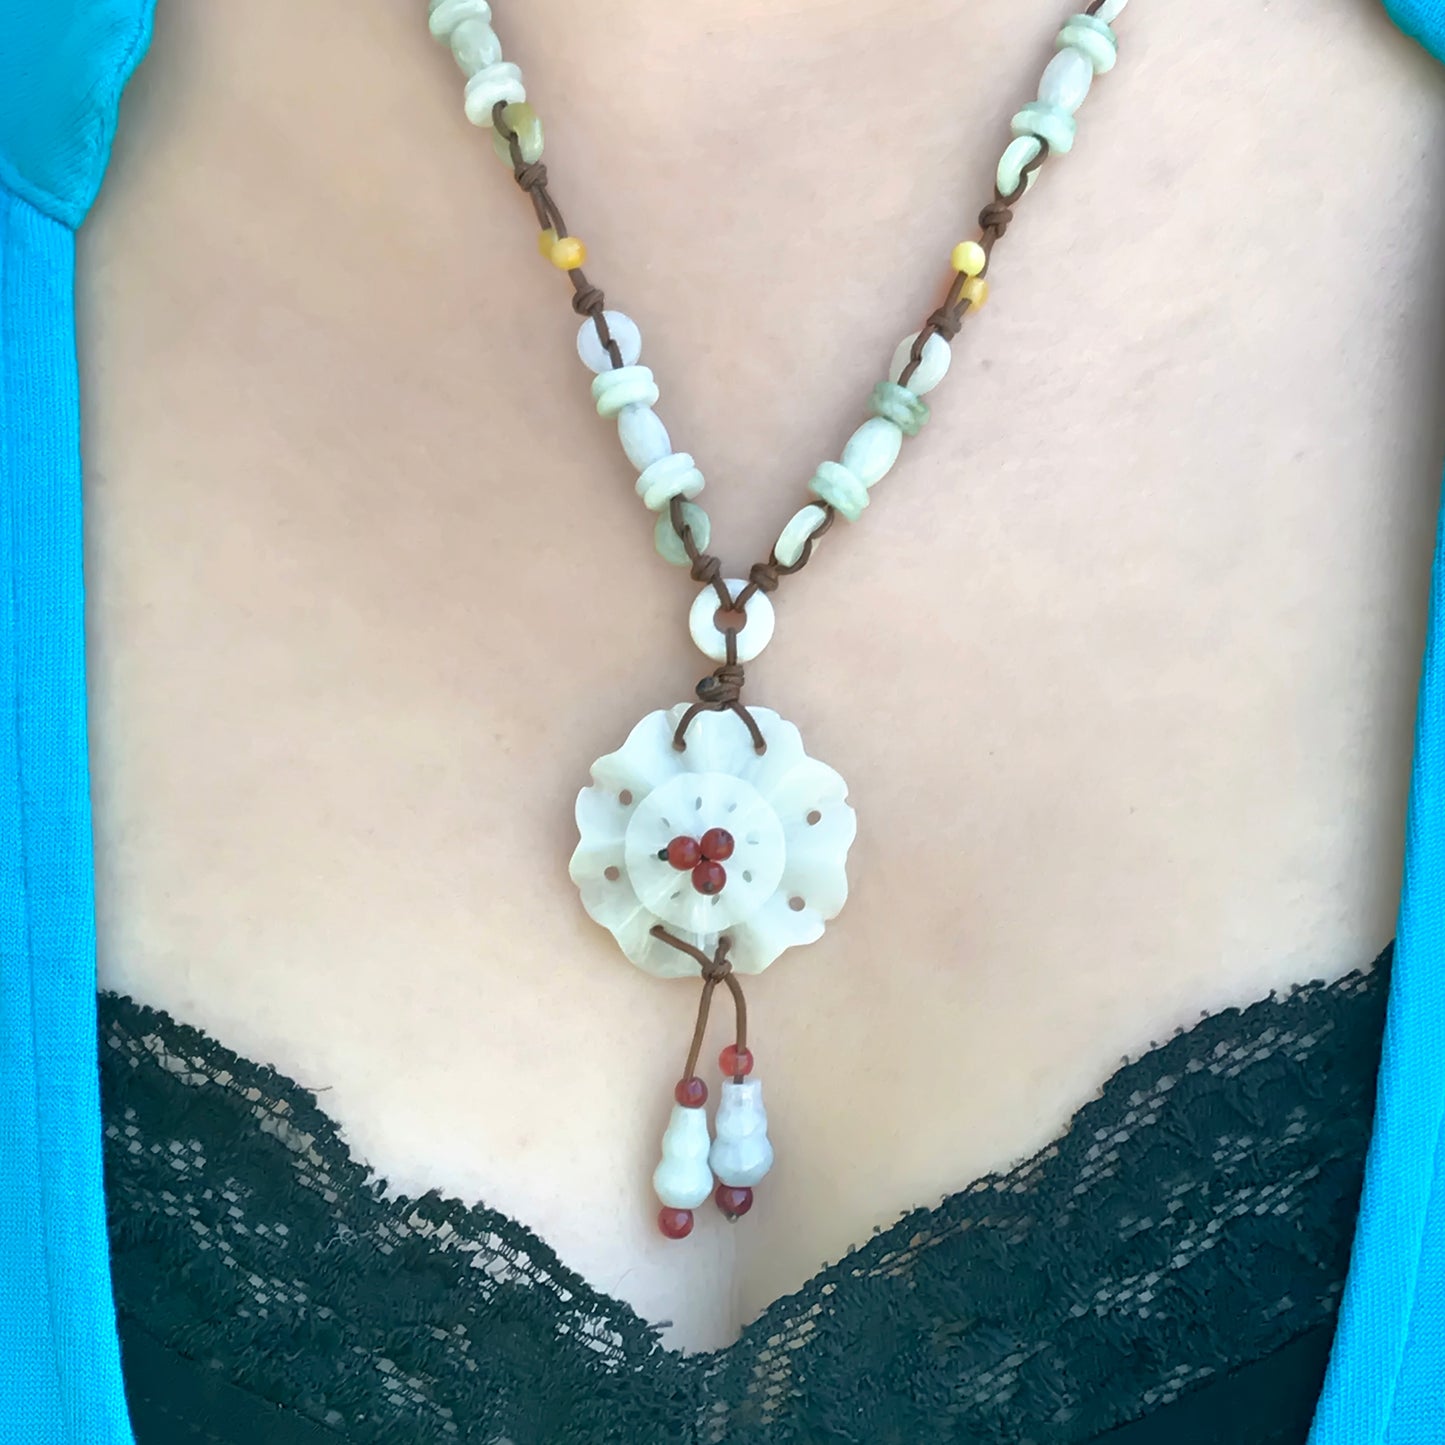 Turn Heads with this Intricate Cornflower Jade Necklace